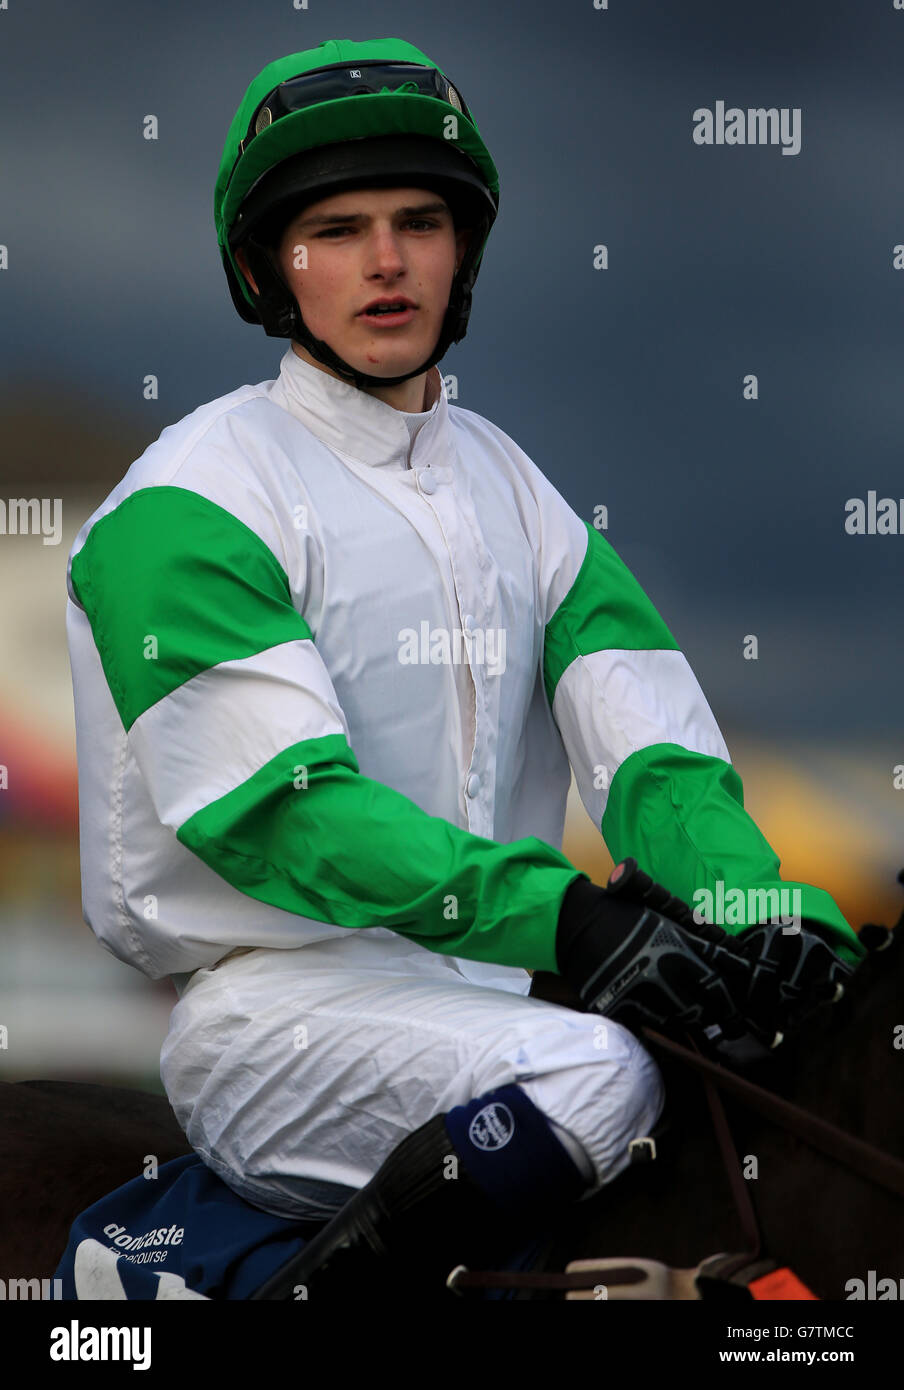 Jockey Alexander Thorne at Doncaster Racecourse. PRESS ASSOCIATION Photo. Picture date Saturday March 28, 2015. See PA Story RACING Doncaster. Photo credit should read: Nick Potts/PA Wire. Stock Photo